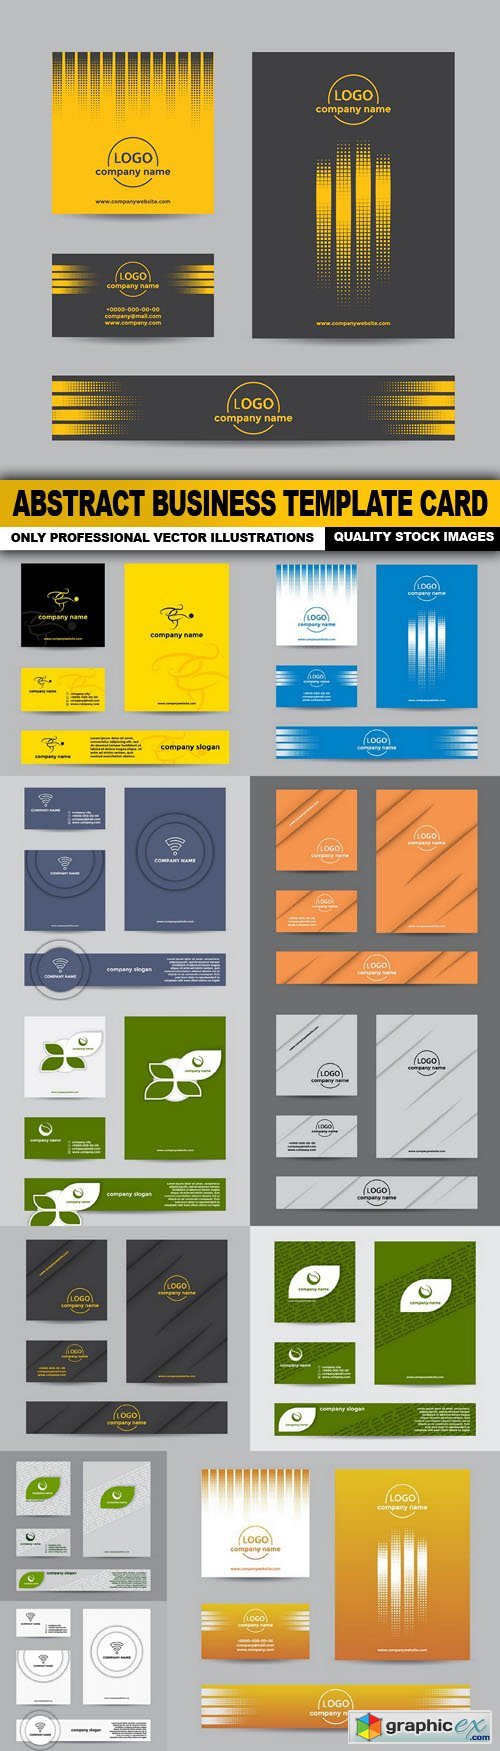 Abstract Business Template Card